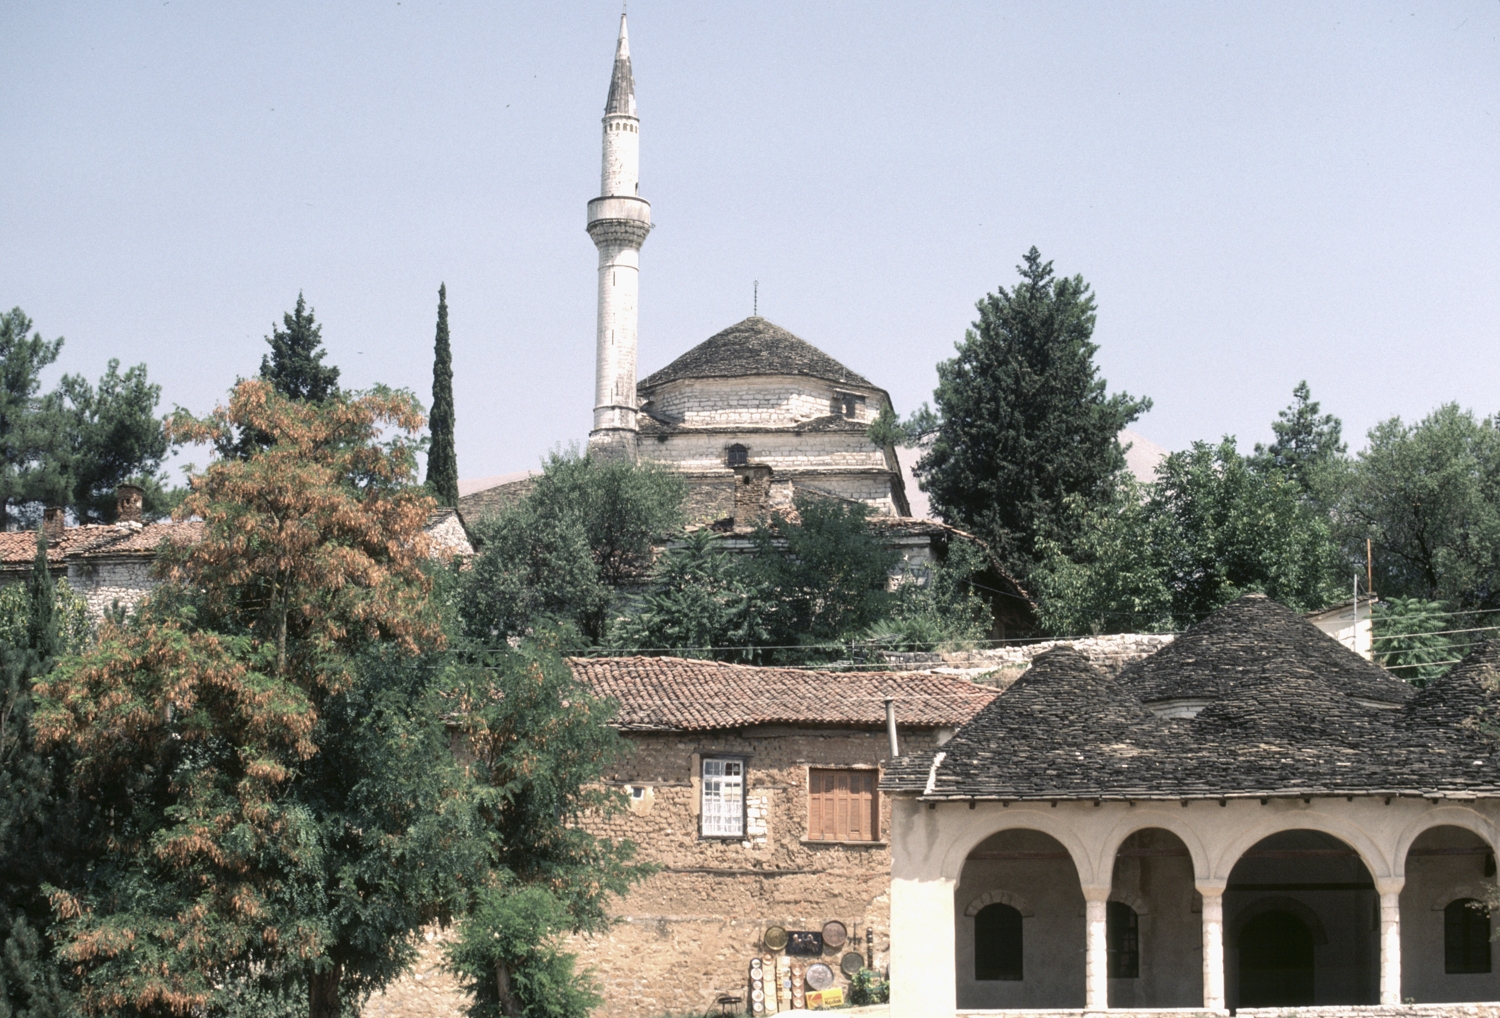 Partial distant view of mosque from southwest, seen above the citadel library